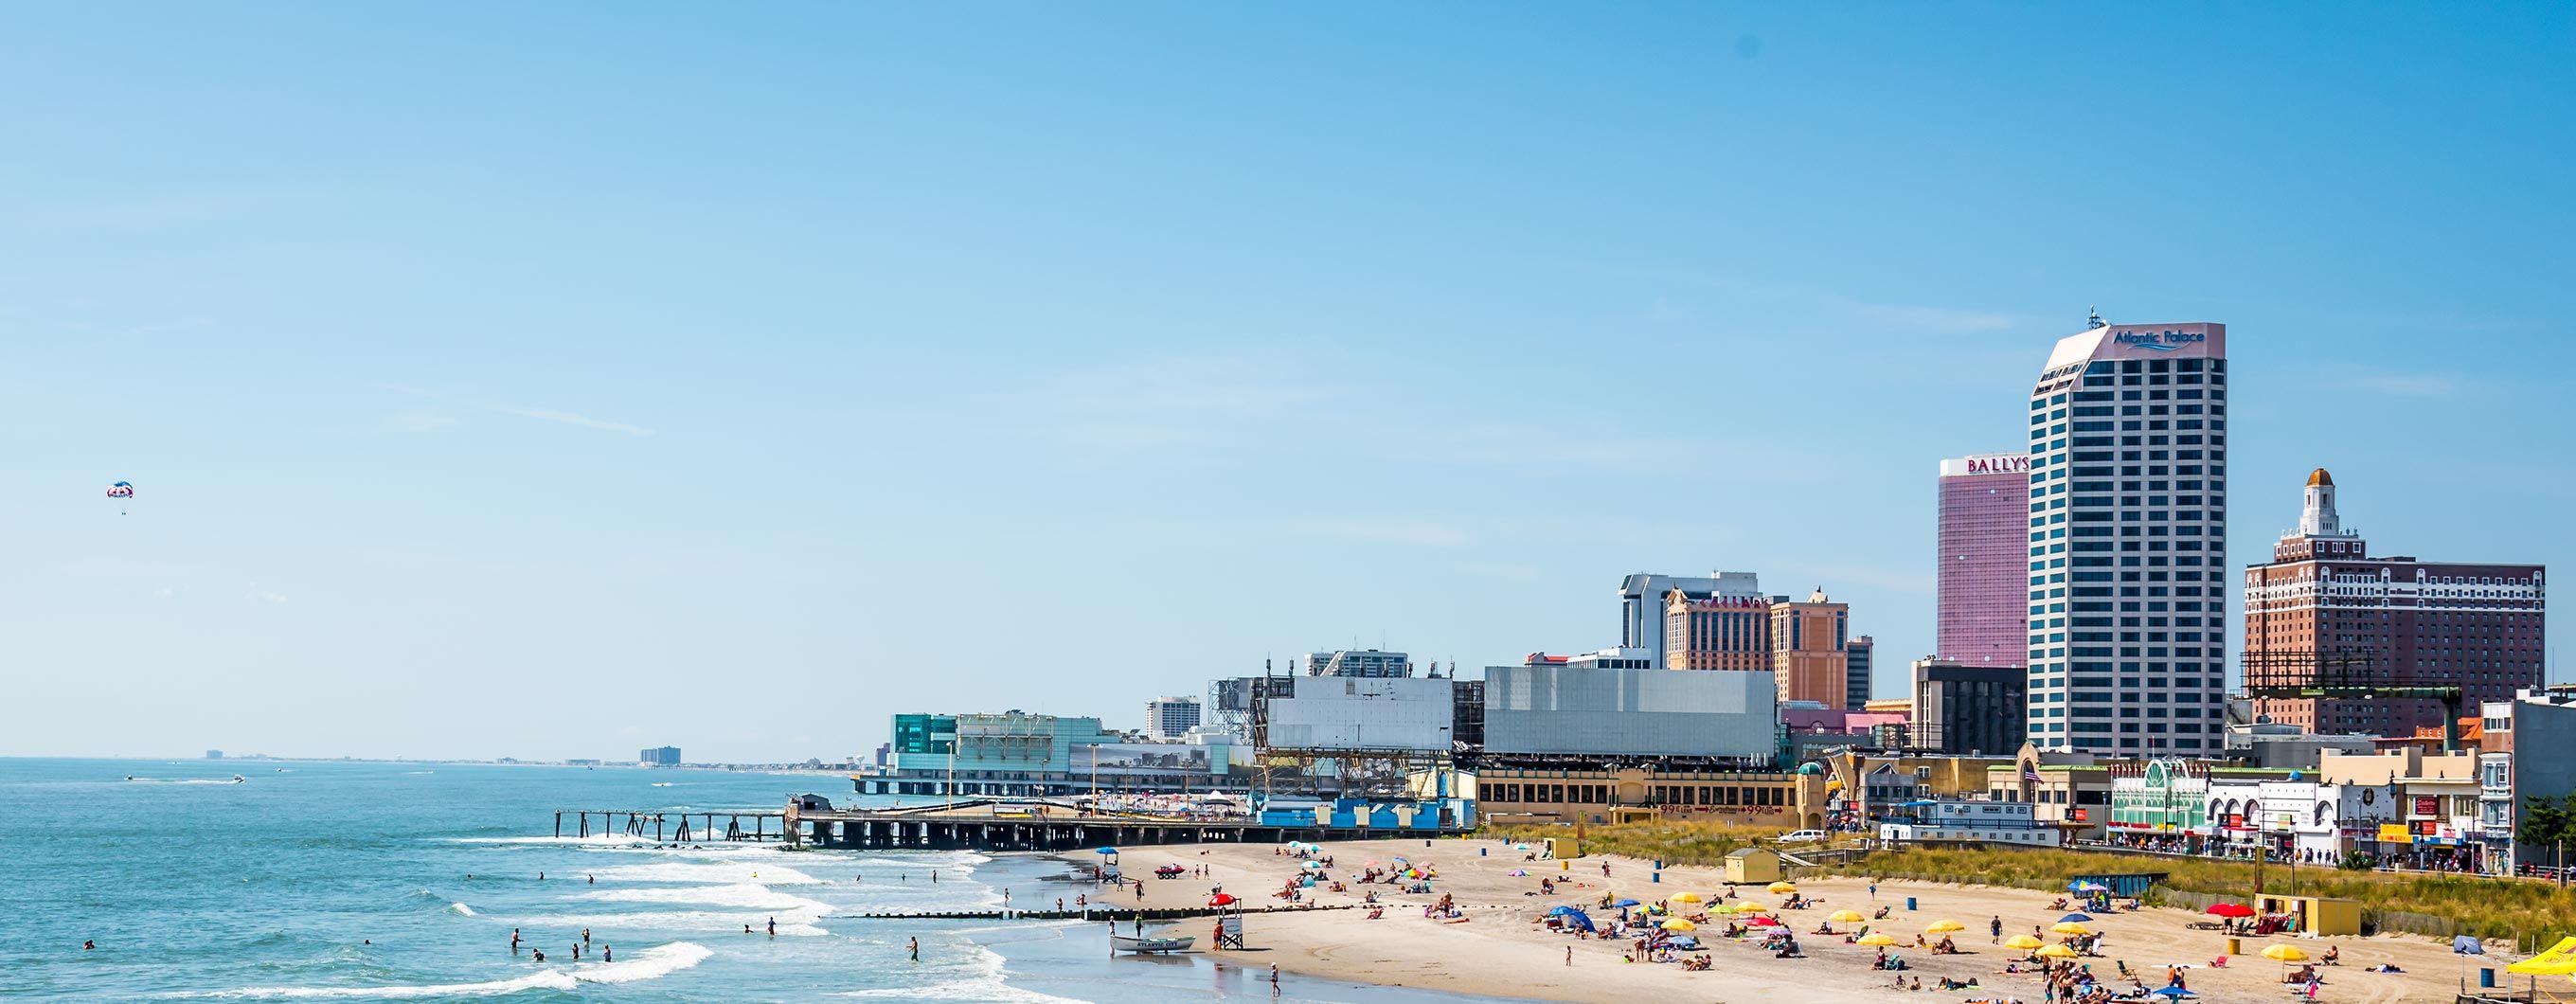 Image of a New Jersey beach with people on it, a boardwalk and buildings in the background